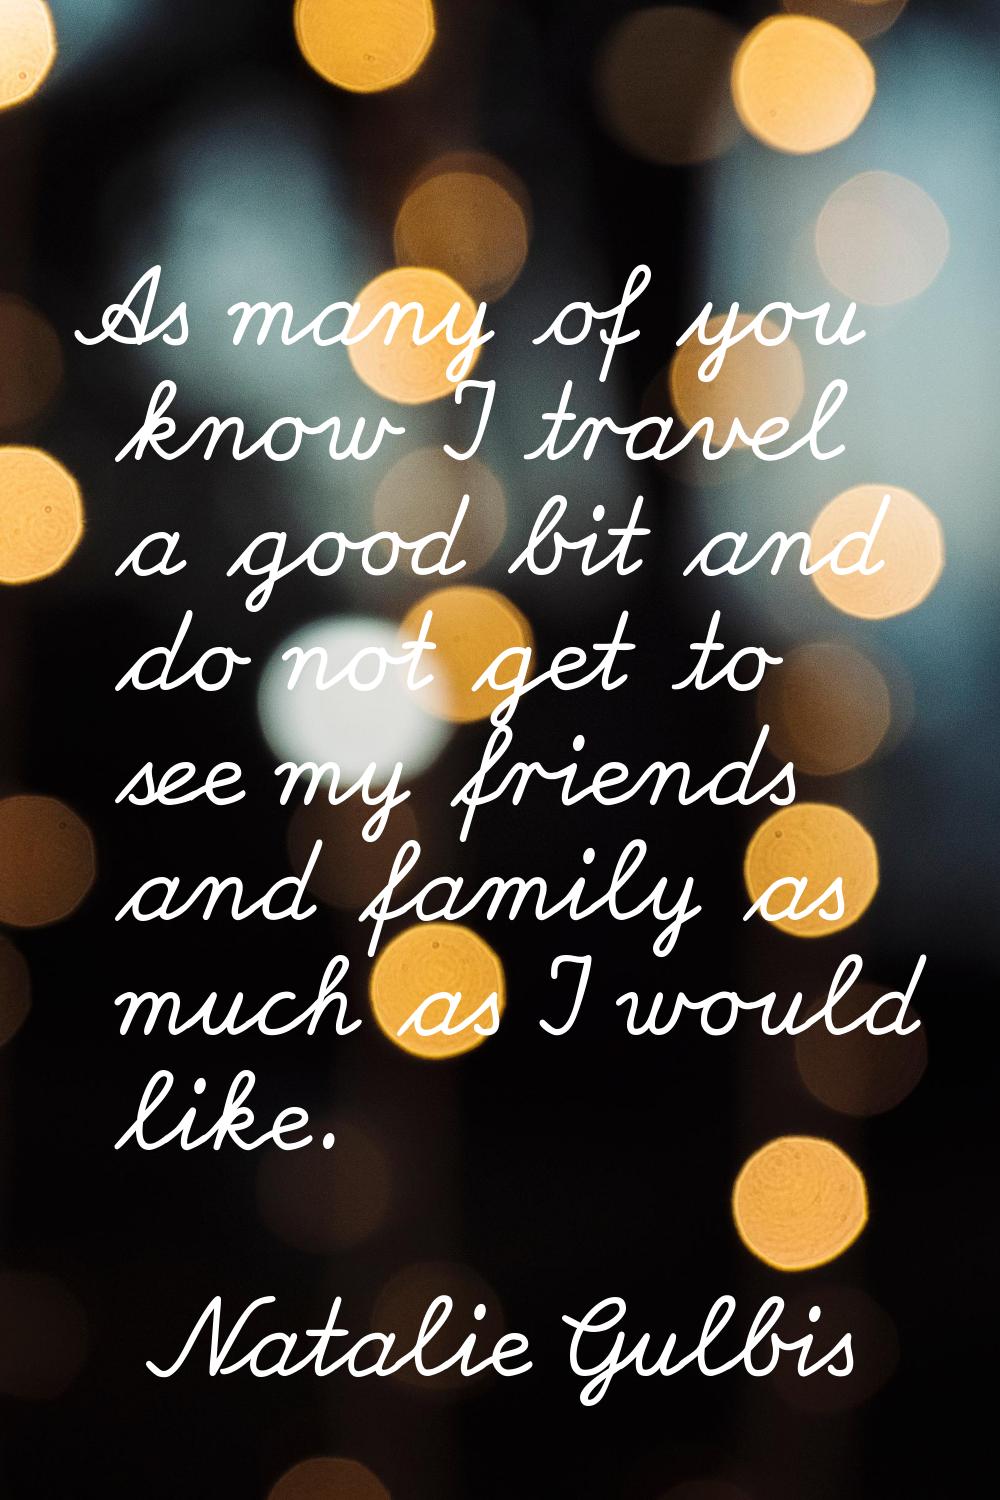 As many of you know I travel a good bit and do not get to see my friends and family as much as I wo